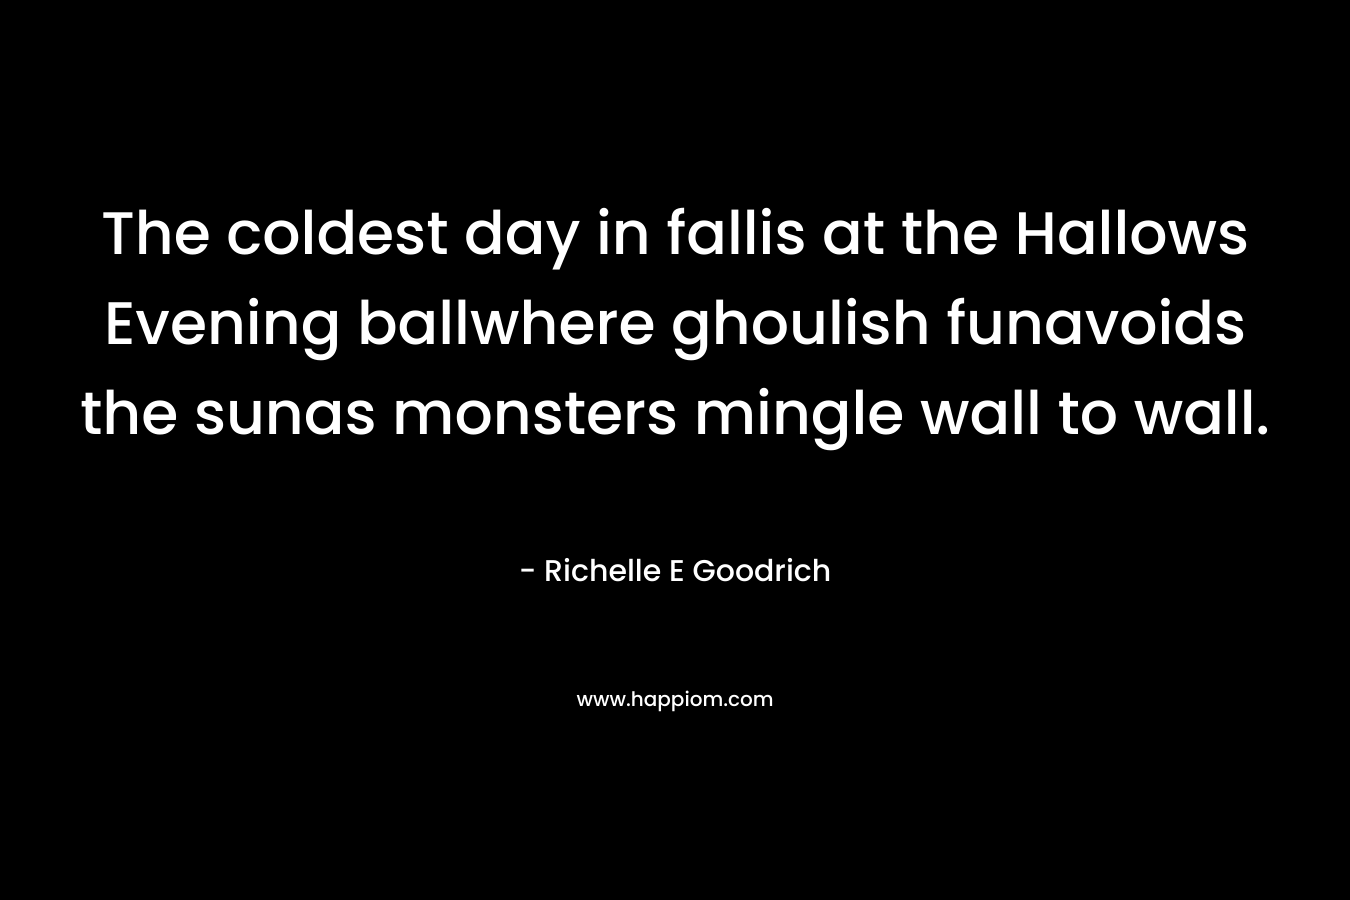 The coldest day in fallis at the Hallows Evening ballwhere ghoulish funavoids the sunas monsters mingle wall to wall. – Richelle E Goodrich